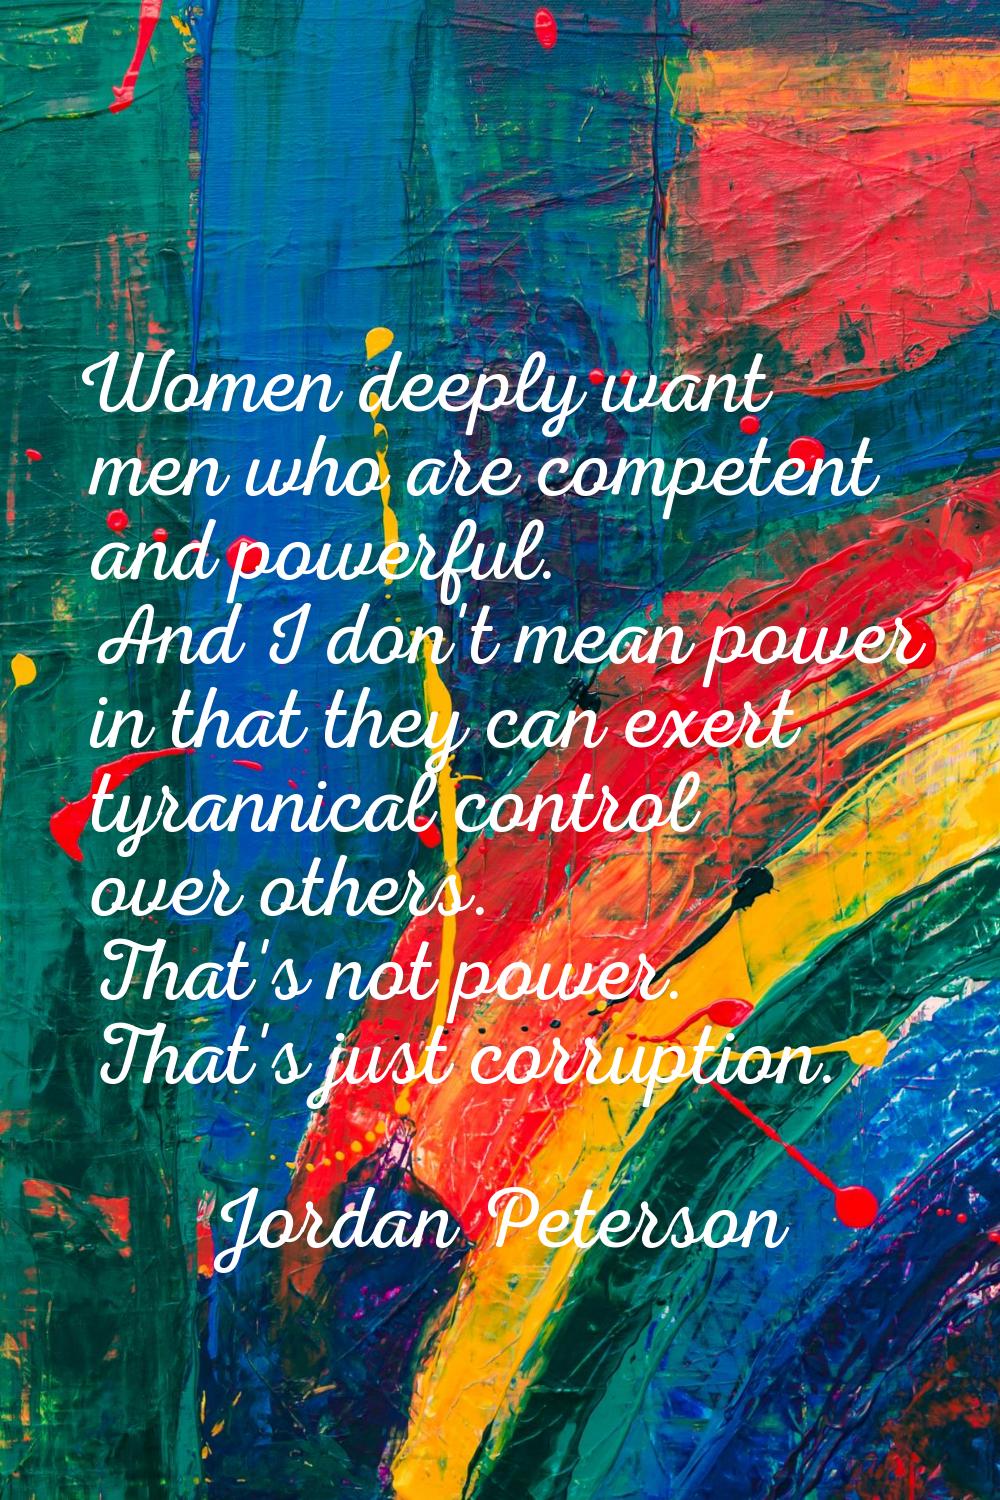 Women deeply want men who are competent and powerful. And I don't mean power in that they can exert